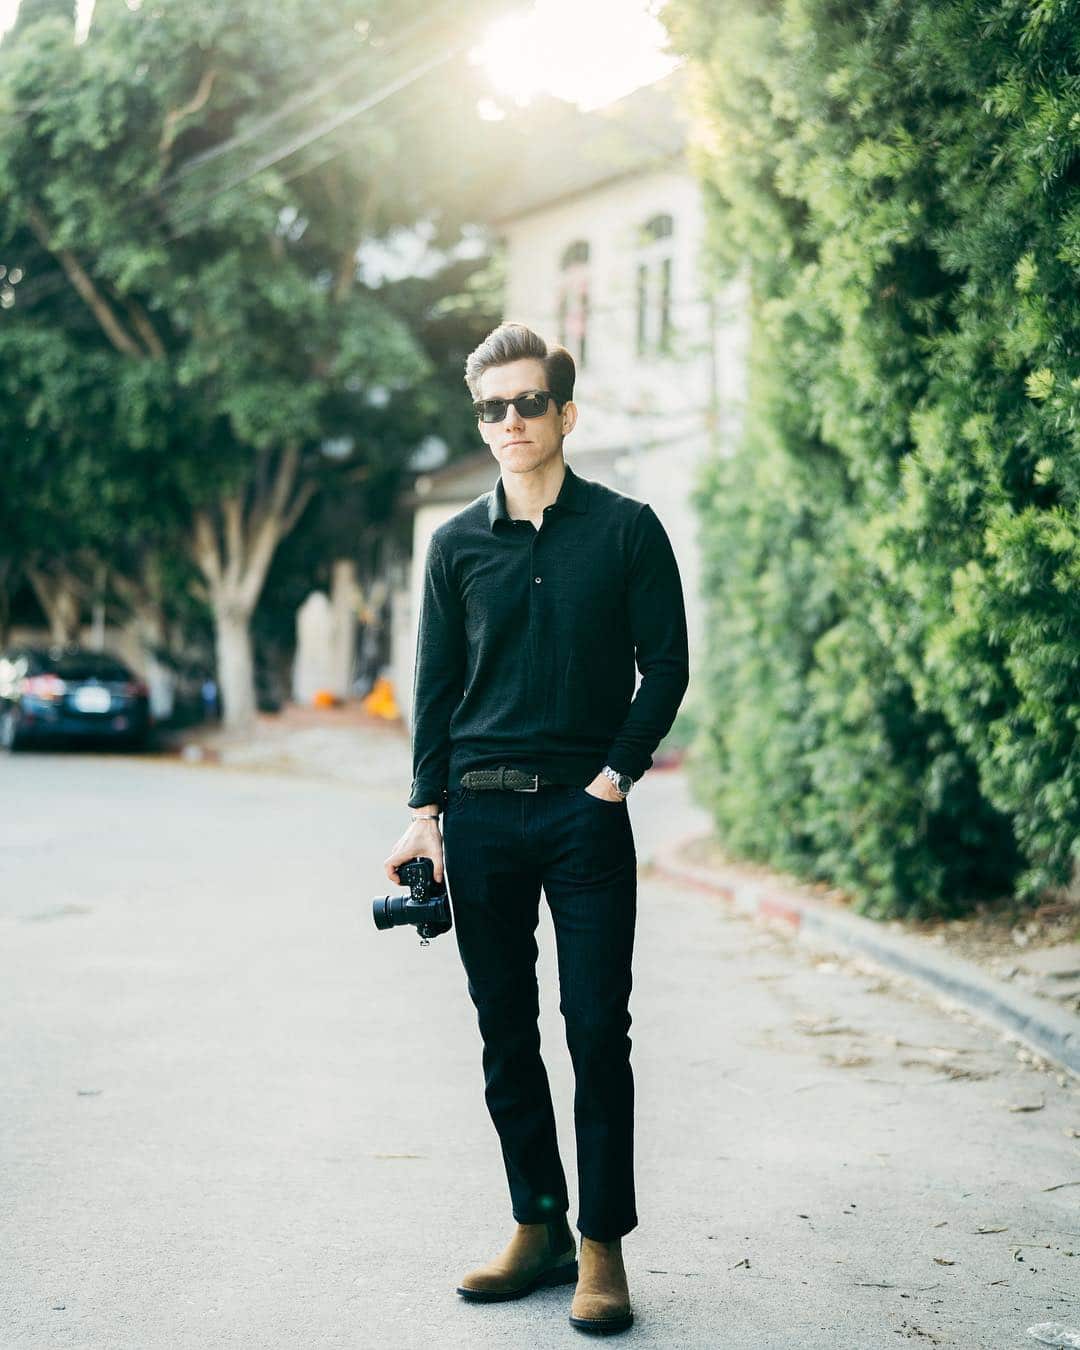 Black Polo Shirt Outfit